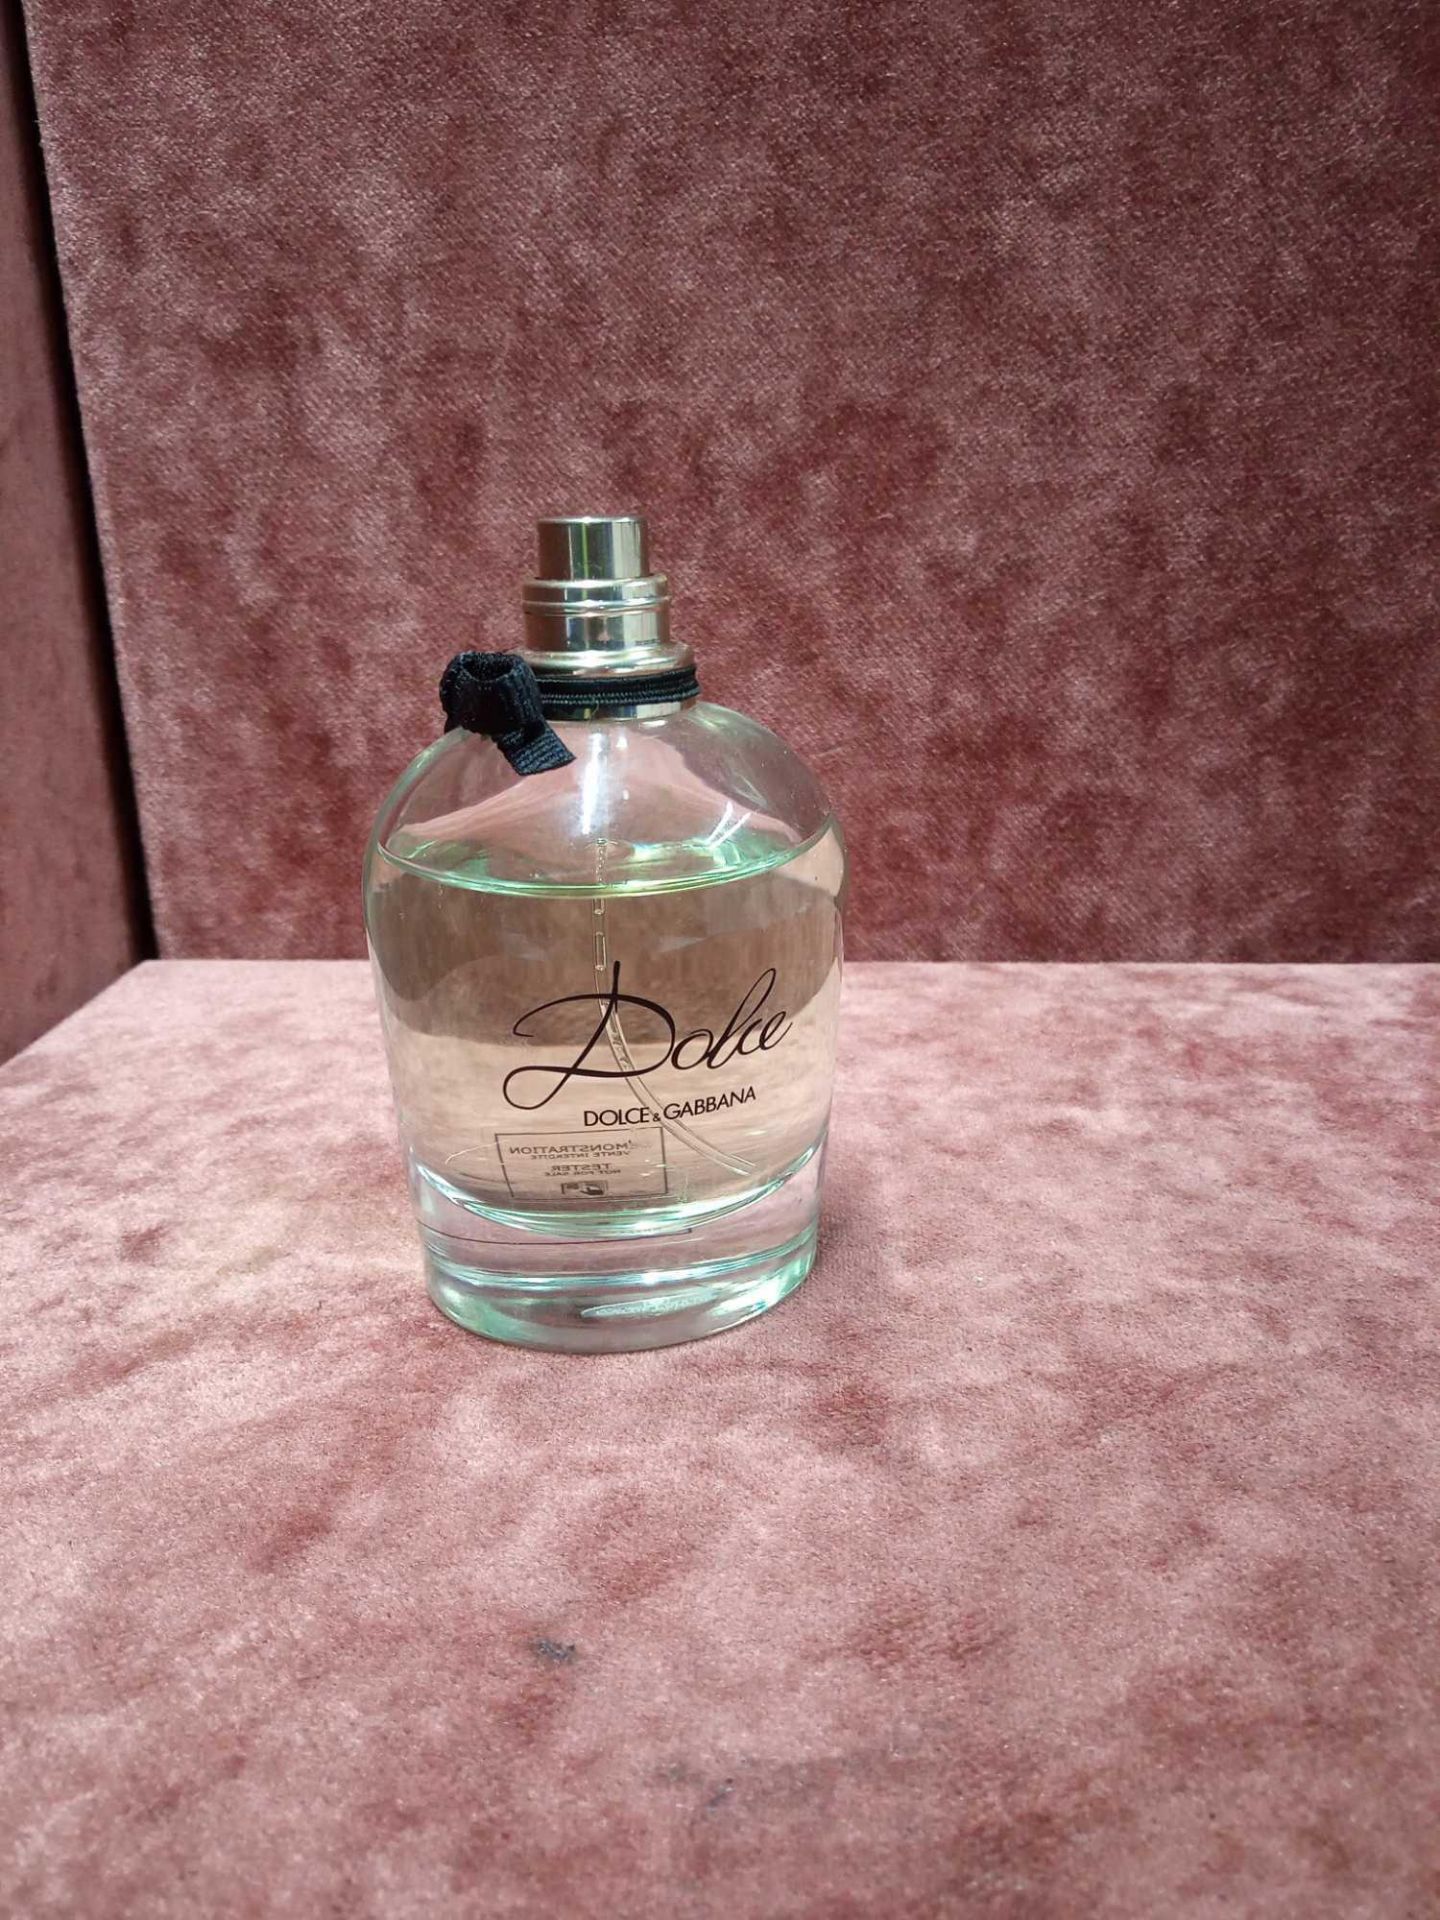 RRP £75 Unboxed 75Ml Tester Bottle Of Dolce And Gabbana Dolce Eau De Parfum Spray Ex-Display